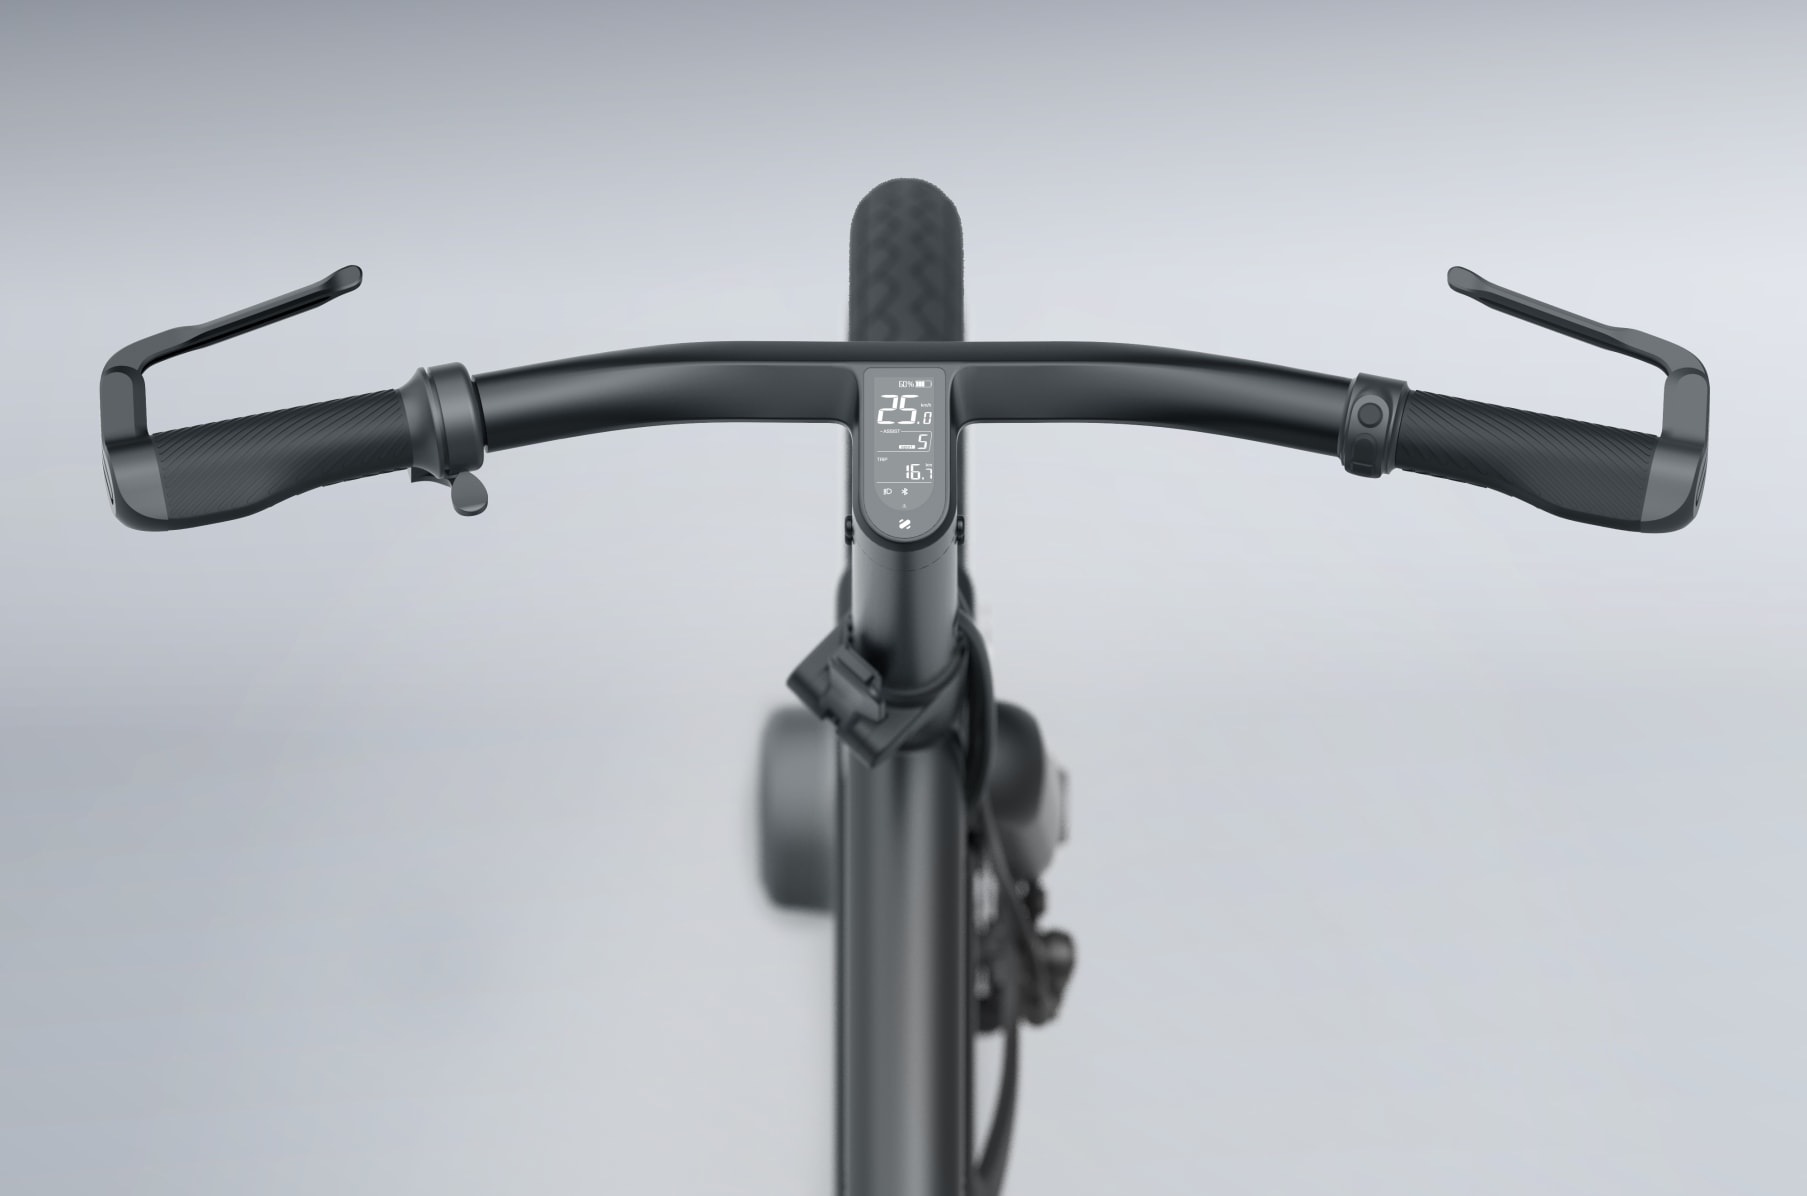 HONBIKE: The Most Convenient Ebike with Shaftdrive | Indiegogo